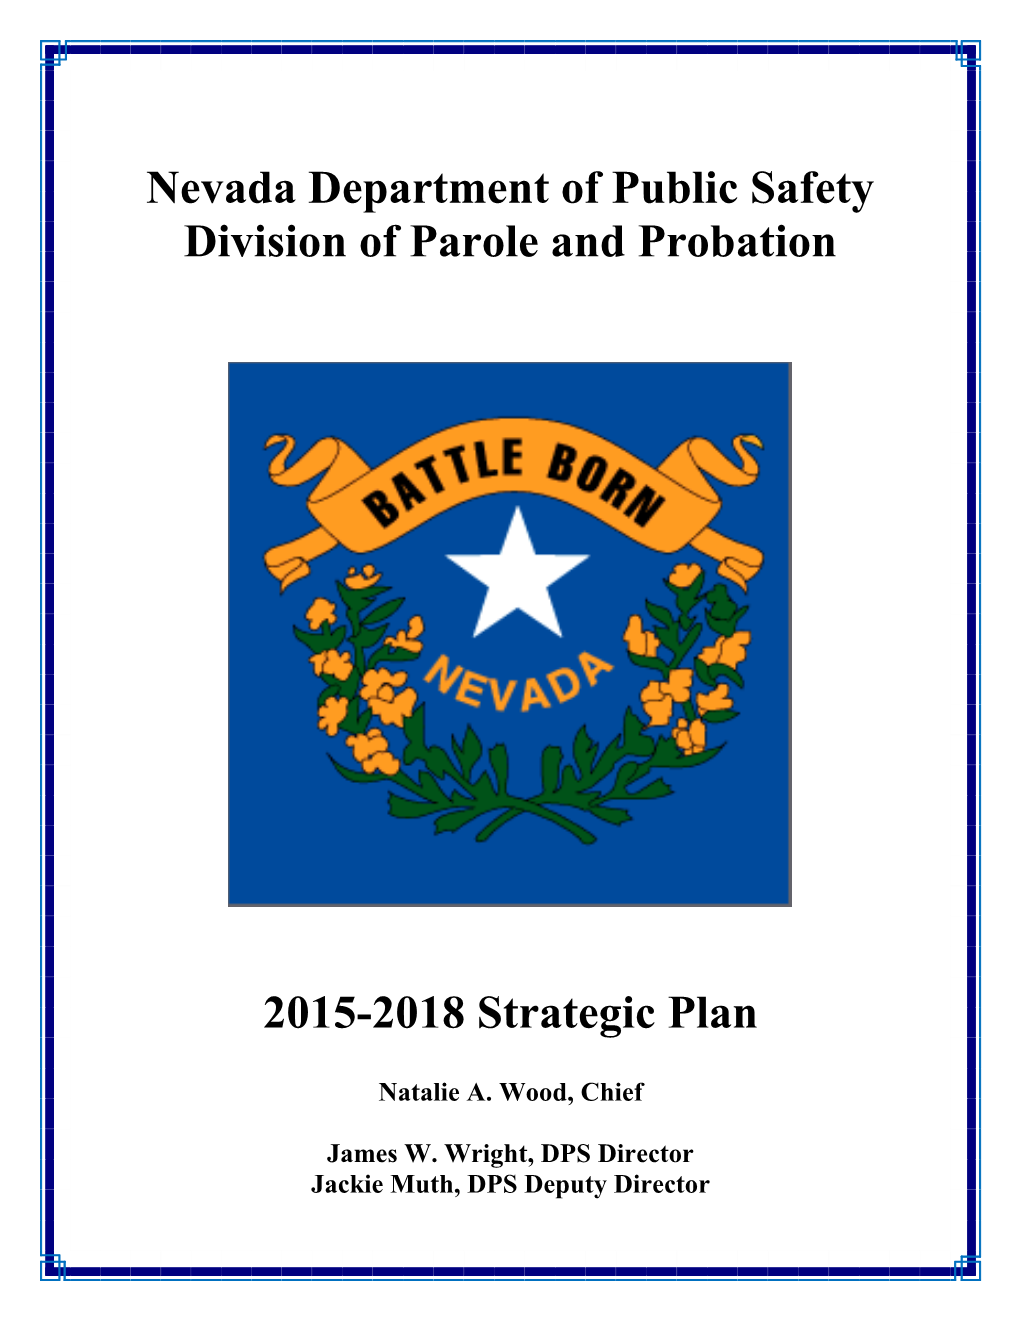 Nevada Department of Public Safety Division of Parole and Probation 2015-2018 Strategic Plan